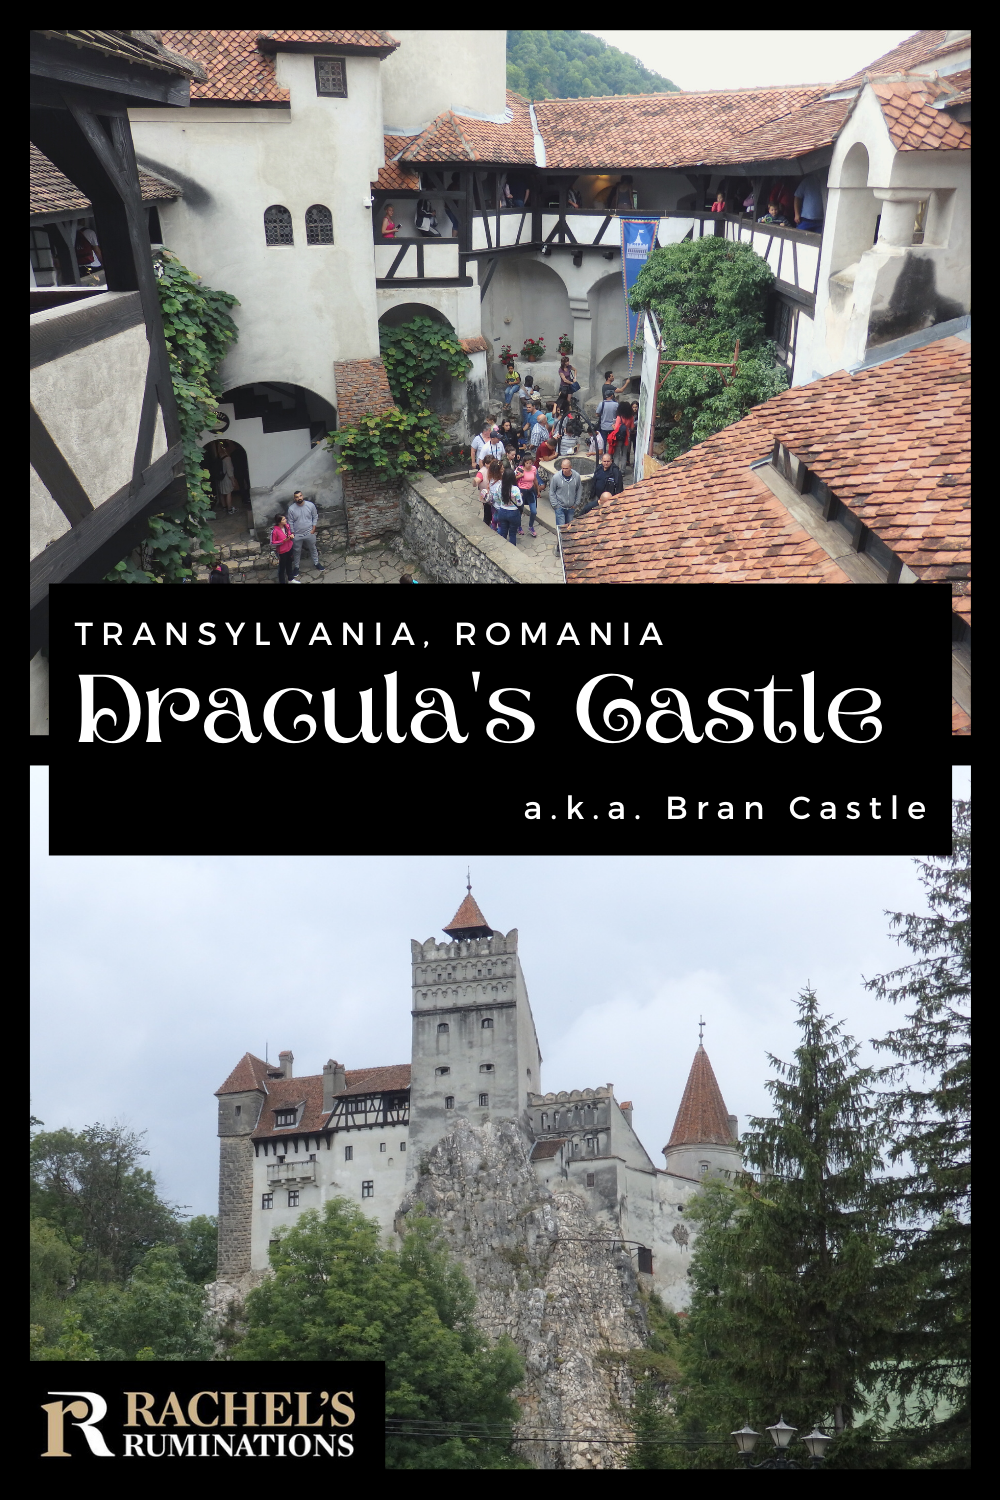 Bran Castle in Romania, known as Dracula’s castle – which it wasn’t really - is a very popular tourist attraction. Is it worth visiting? #brancastle #dracula #transylvania #romania #castle via @rachelsruminations